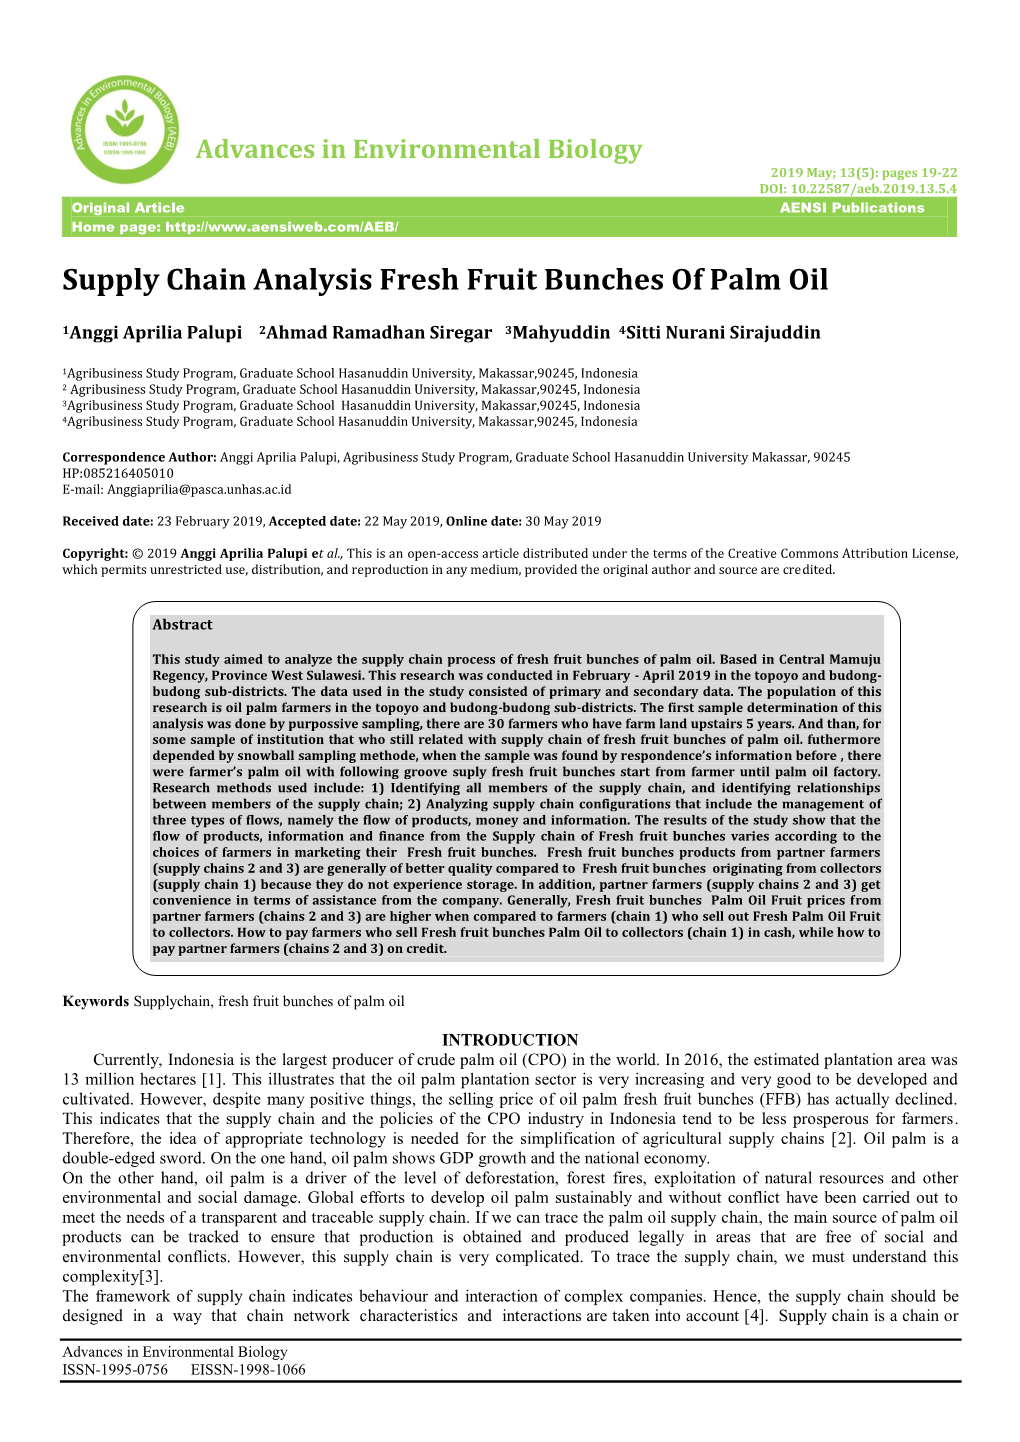 Supply Chain Analysis Fresh Fruit Bunches of Palm Oil